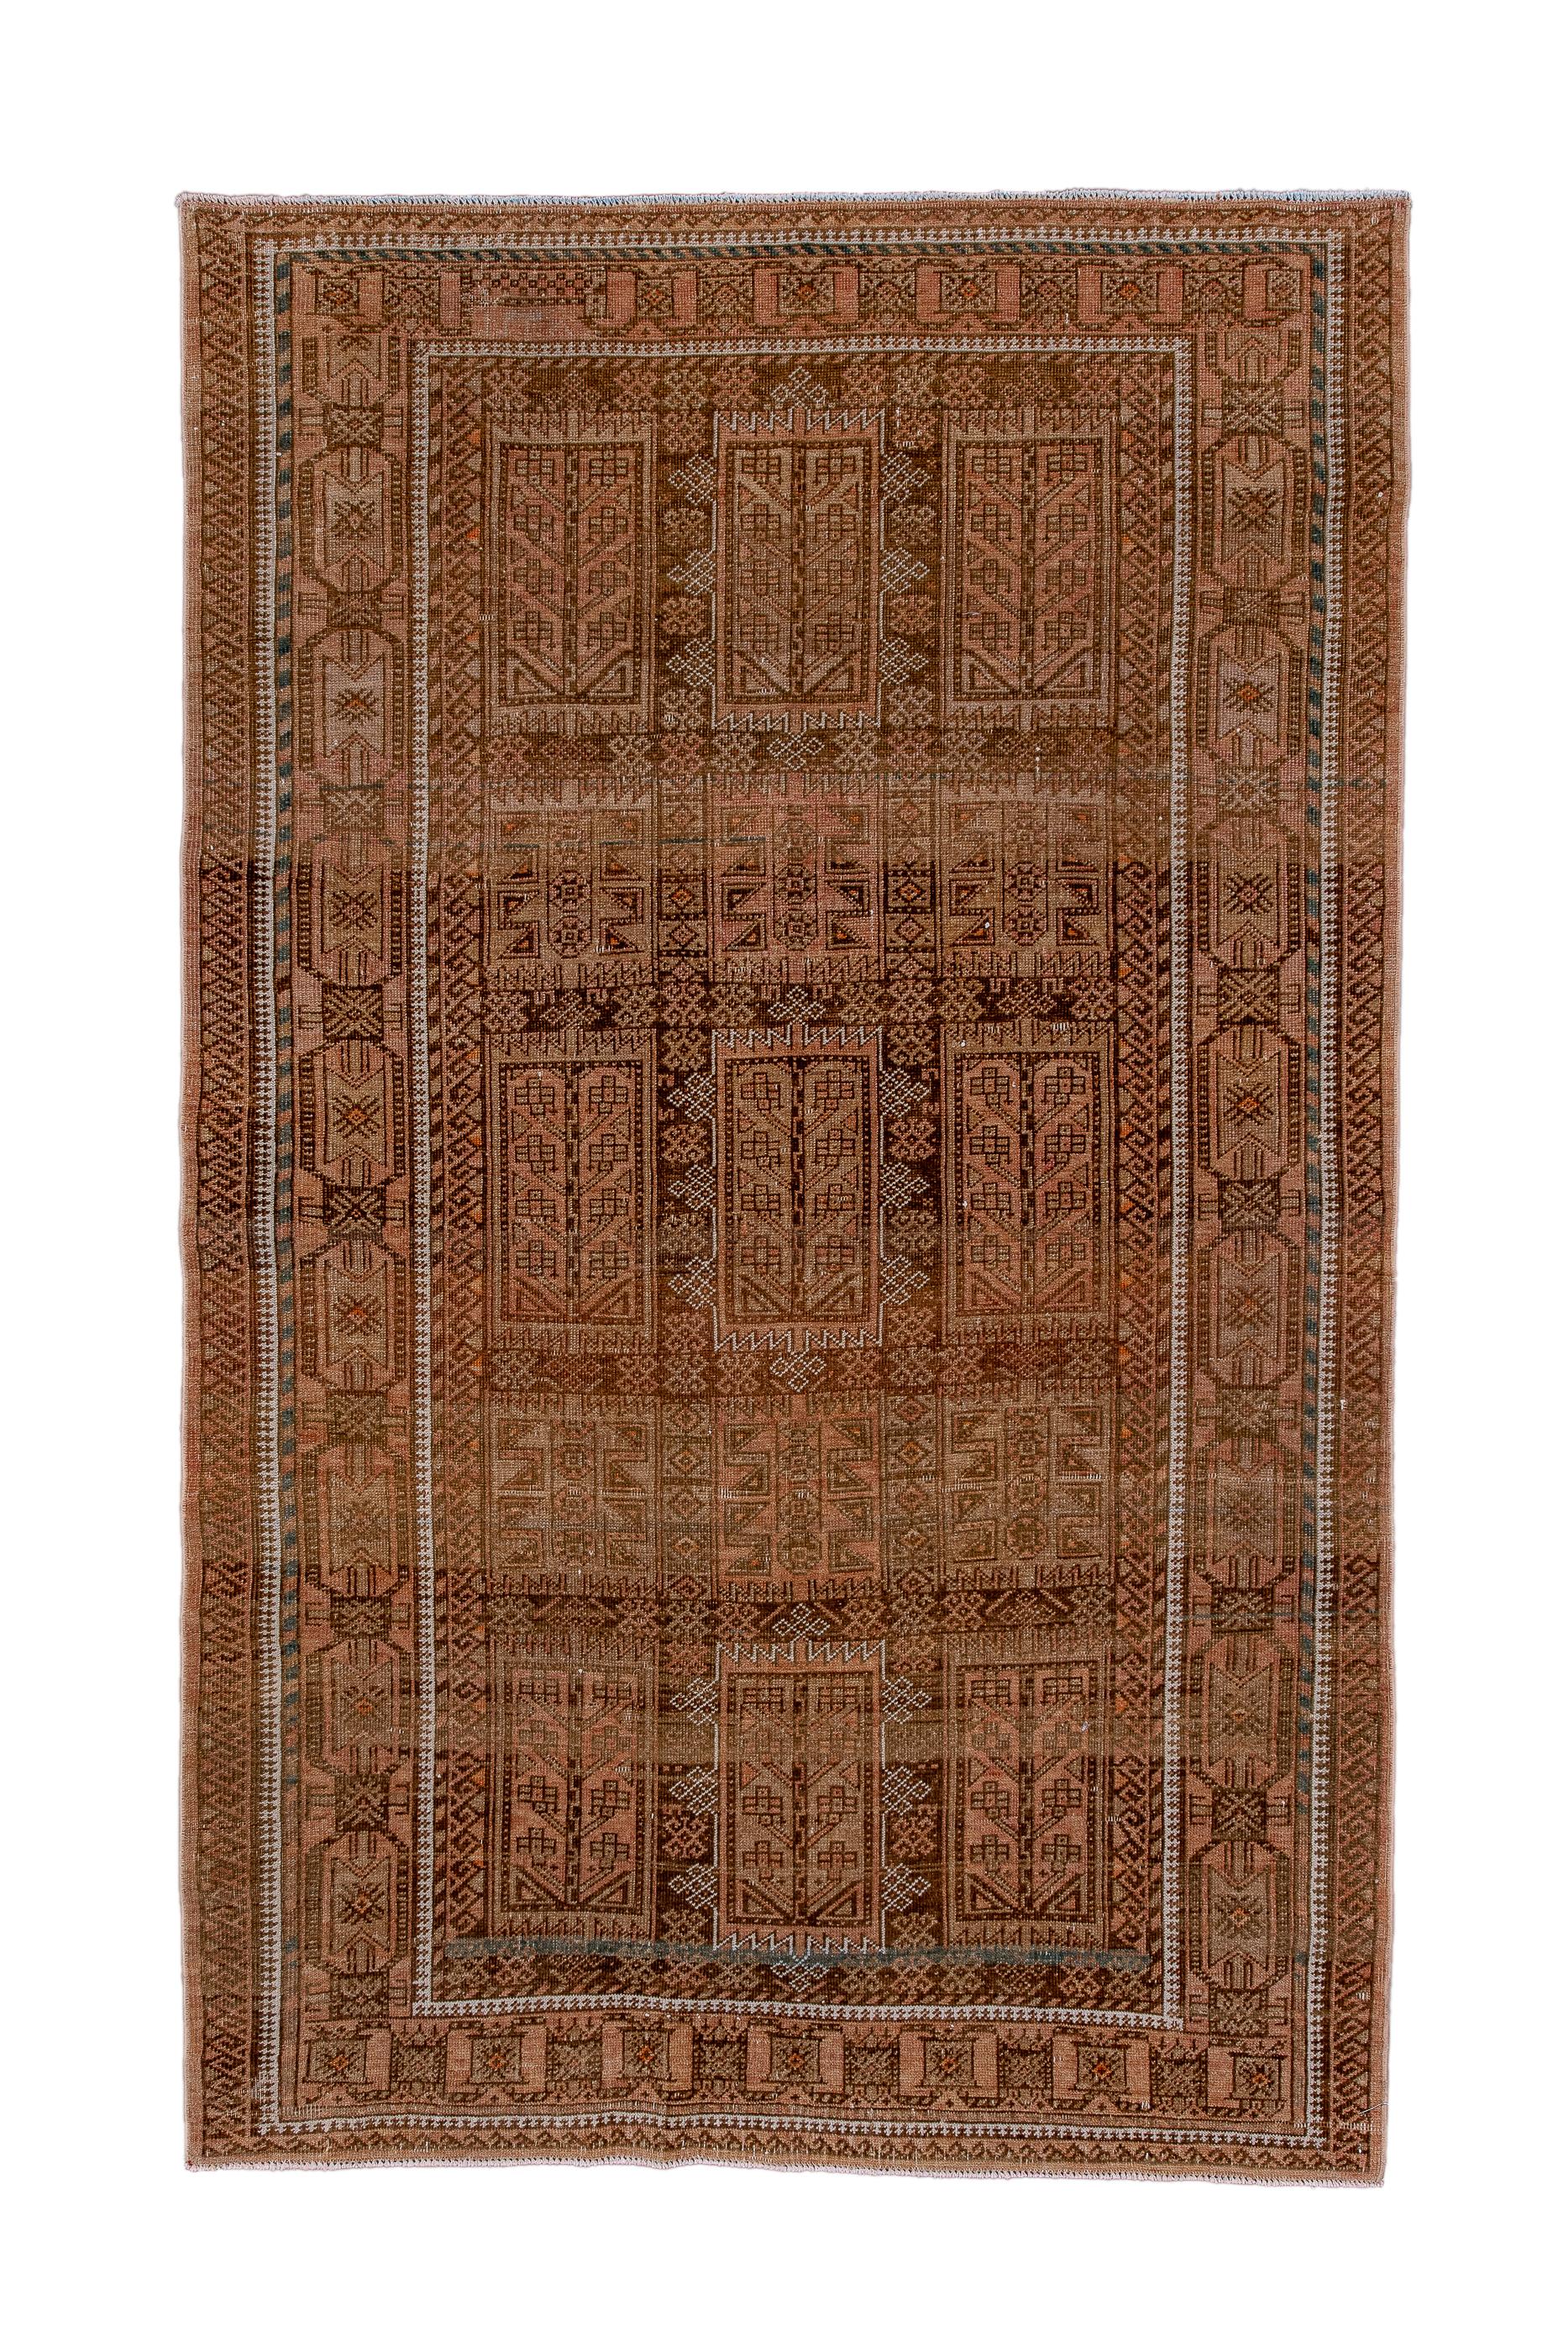 Or from western Afghanistan. This totally nomadic scatter rug shows a grid pattern of three rows of three rectangles enclosing single, stylized flowers and rows of shorter squares with Zee patterns. Coral-brown field and border. Open hexagon and